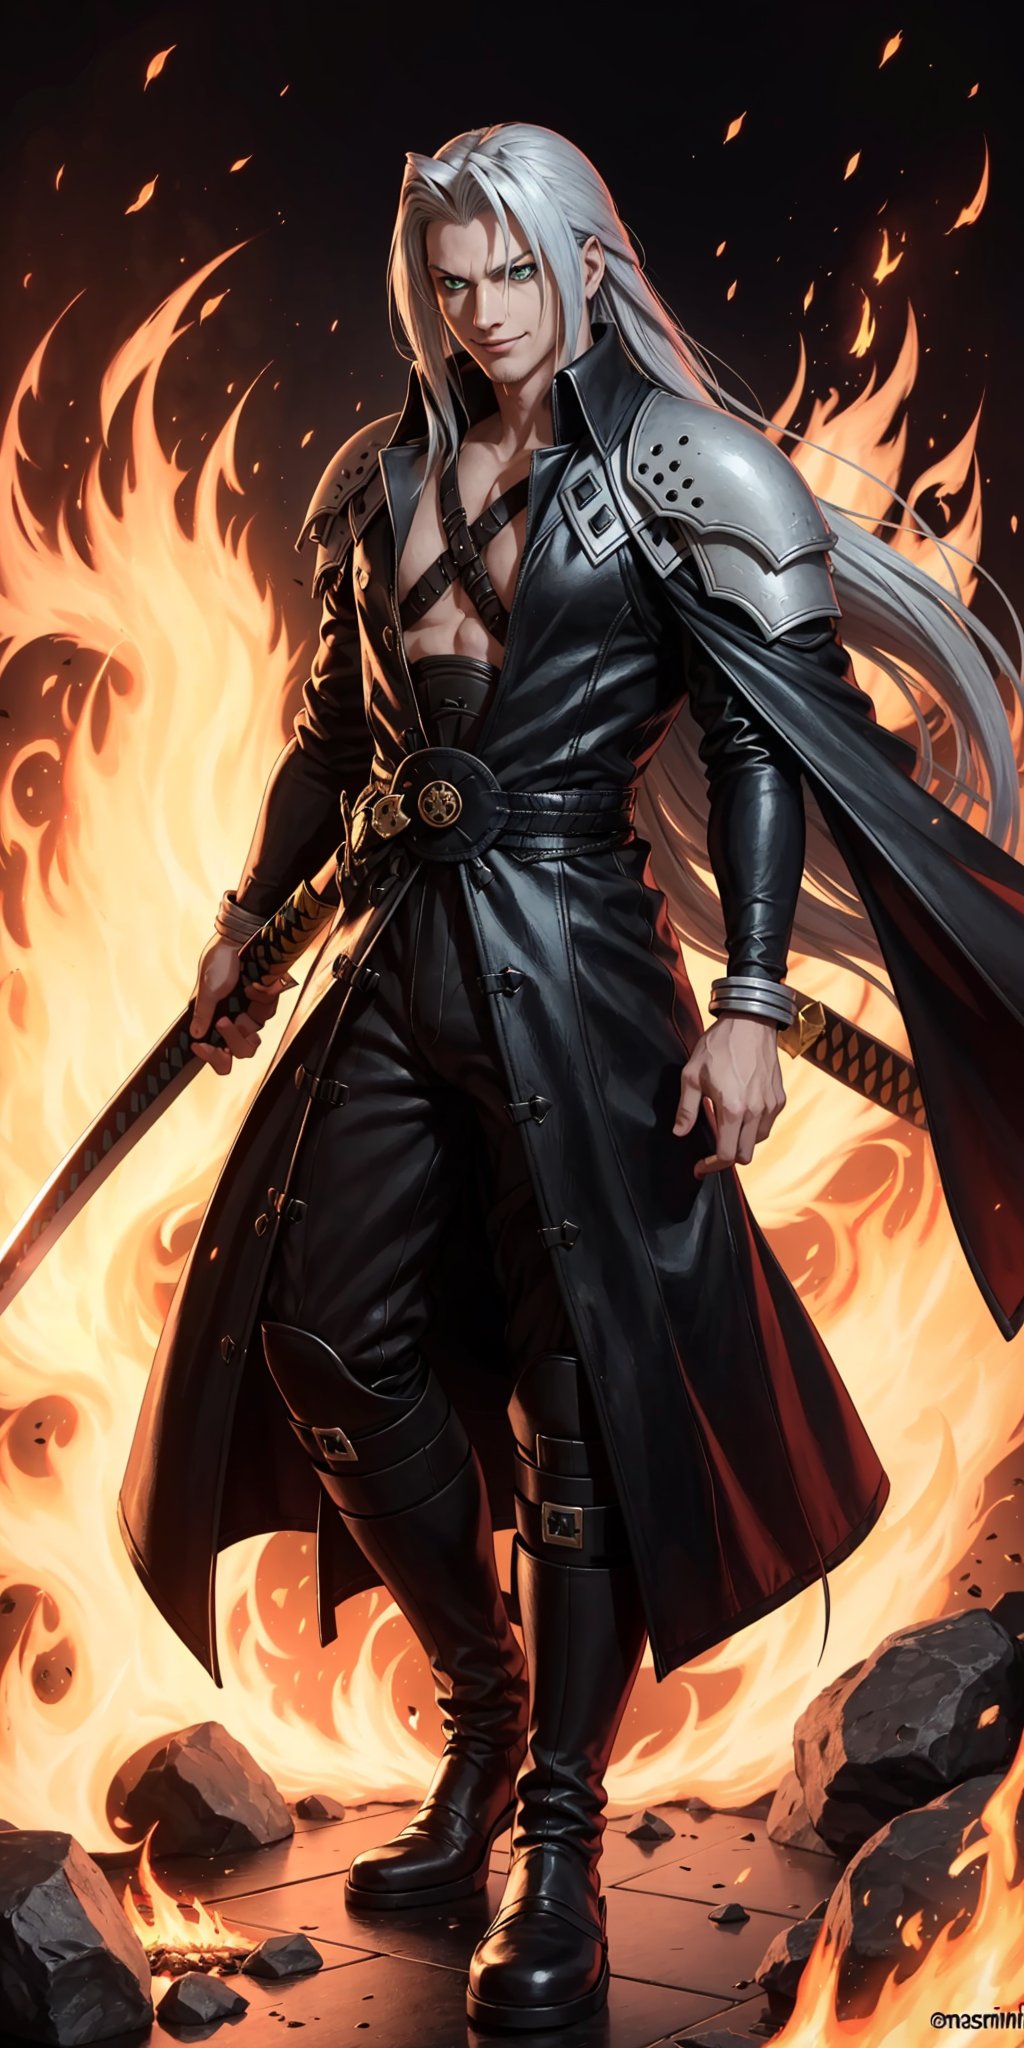 Sephiroth (Final Fantasy),burning village,standing in fire,evil face,omnious smile,unafected by the flames,fantast,scifi,masamune,unrealisticalty long katana,